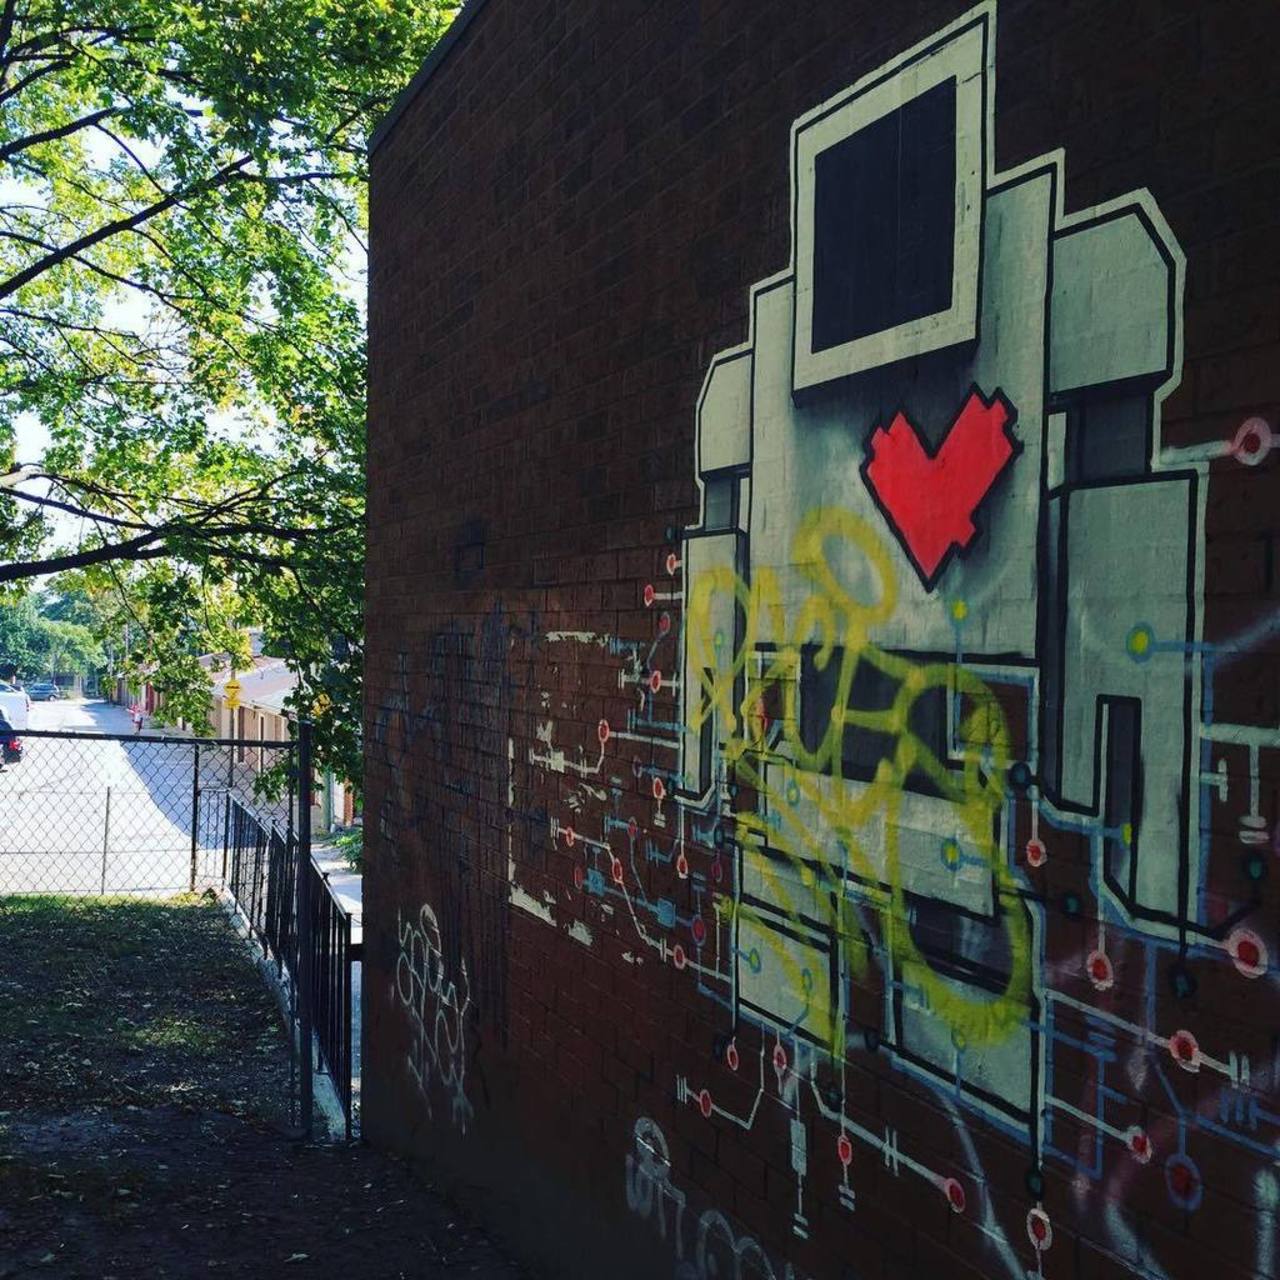 Meet the #robot #mural in #Toronto. Guess where exactly it is:) #graffiti #graffitiporn #redheart by themicahmunrot… http://t.co/ixiWOj6y5A